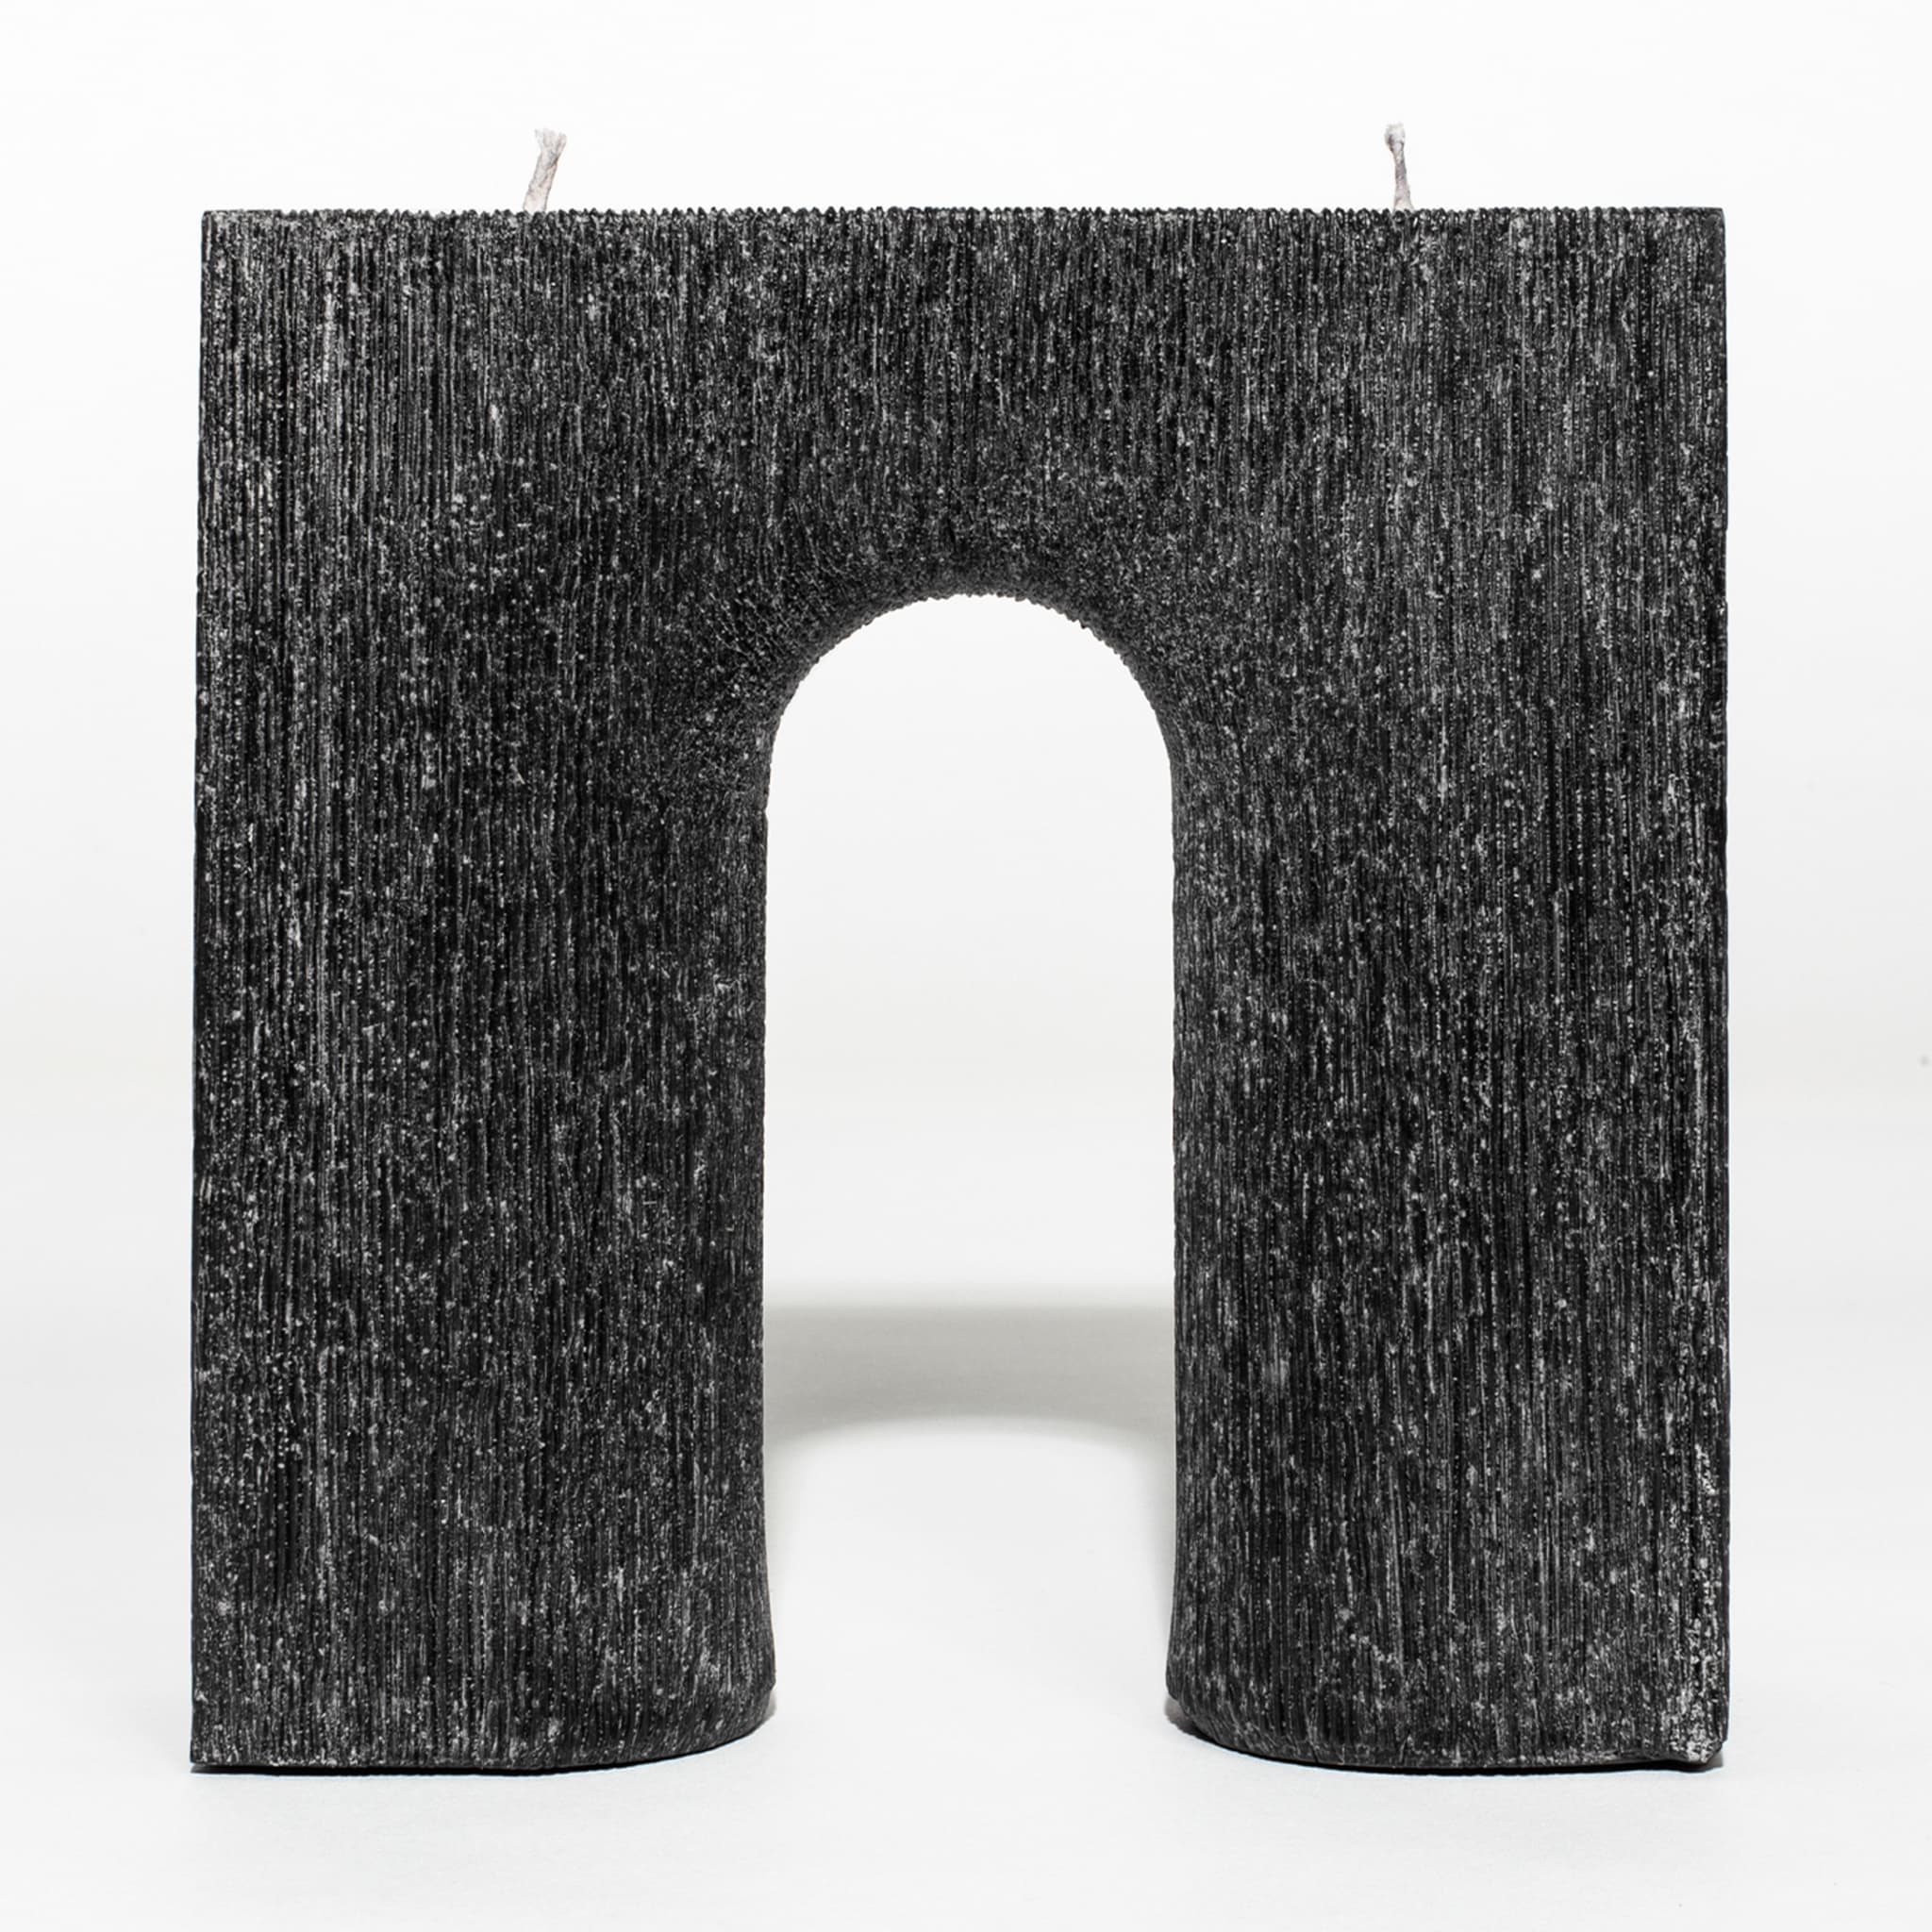 Trionfo Set of 2 Black Candles - Alternative view 1